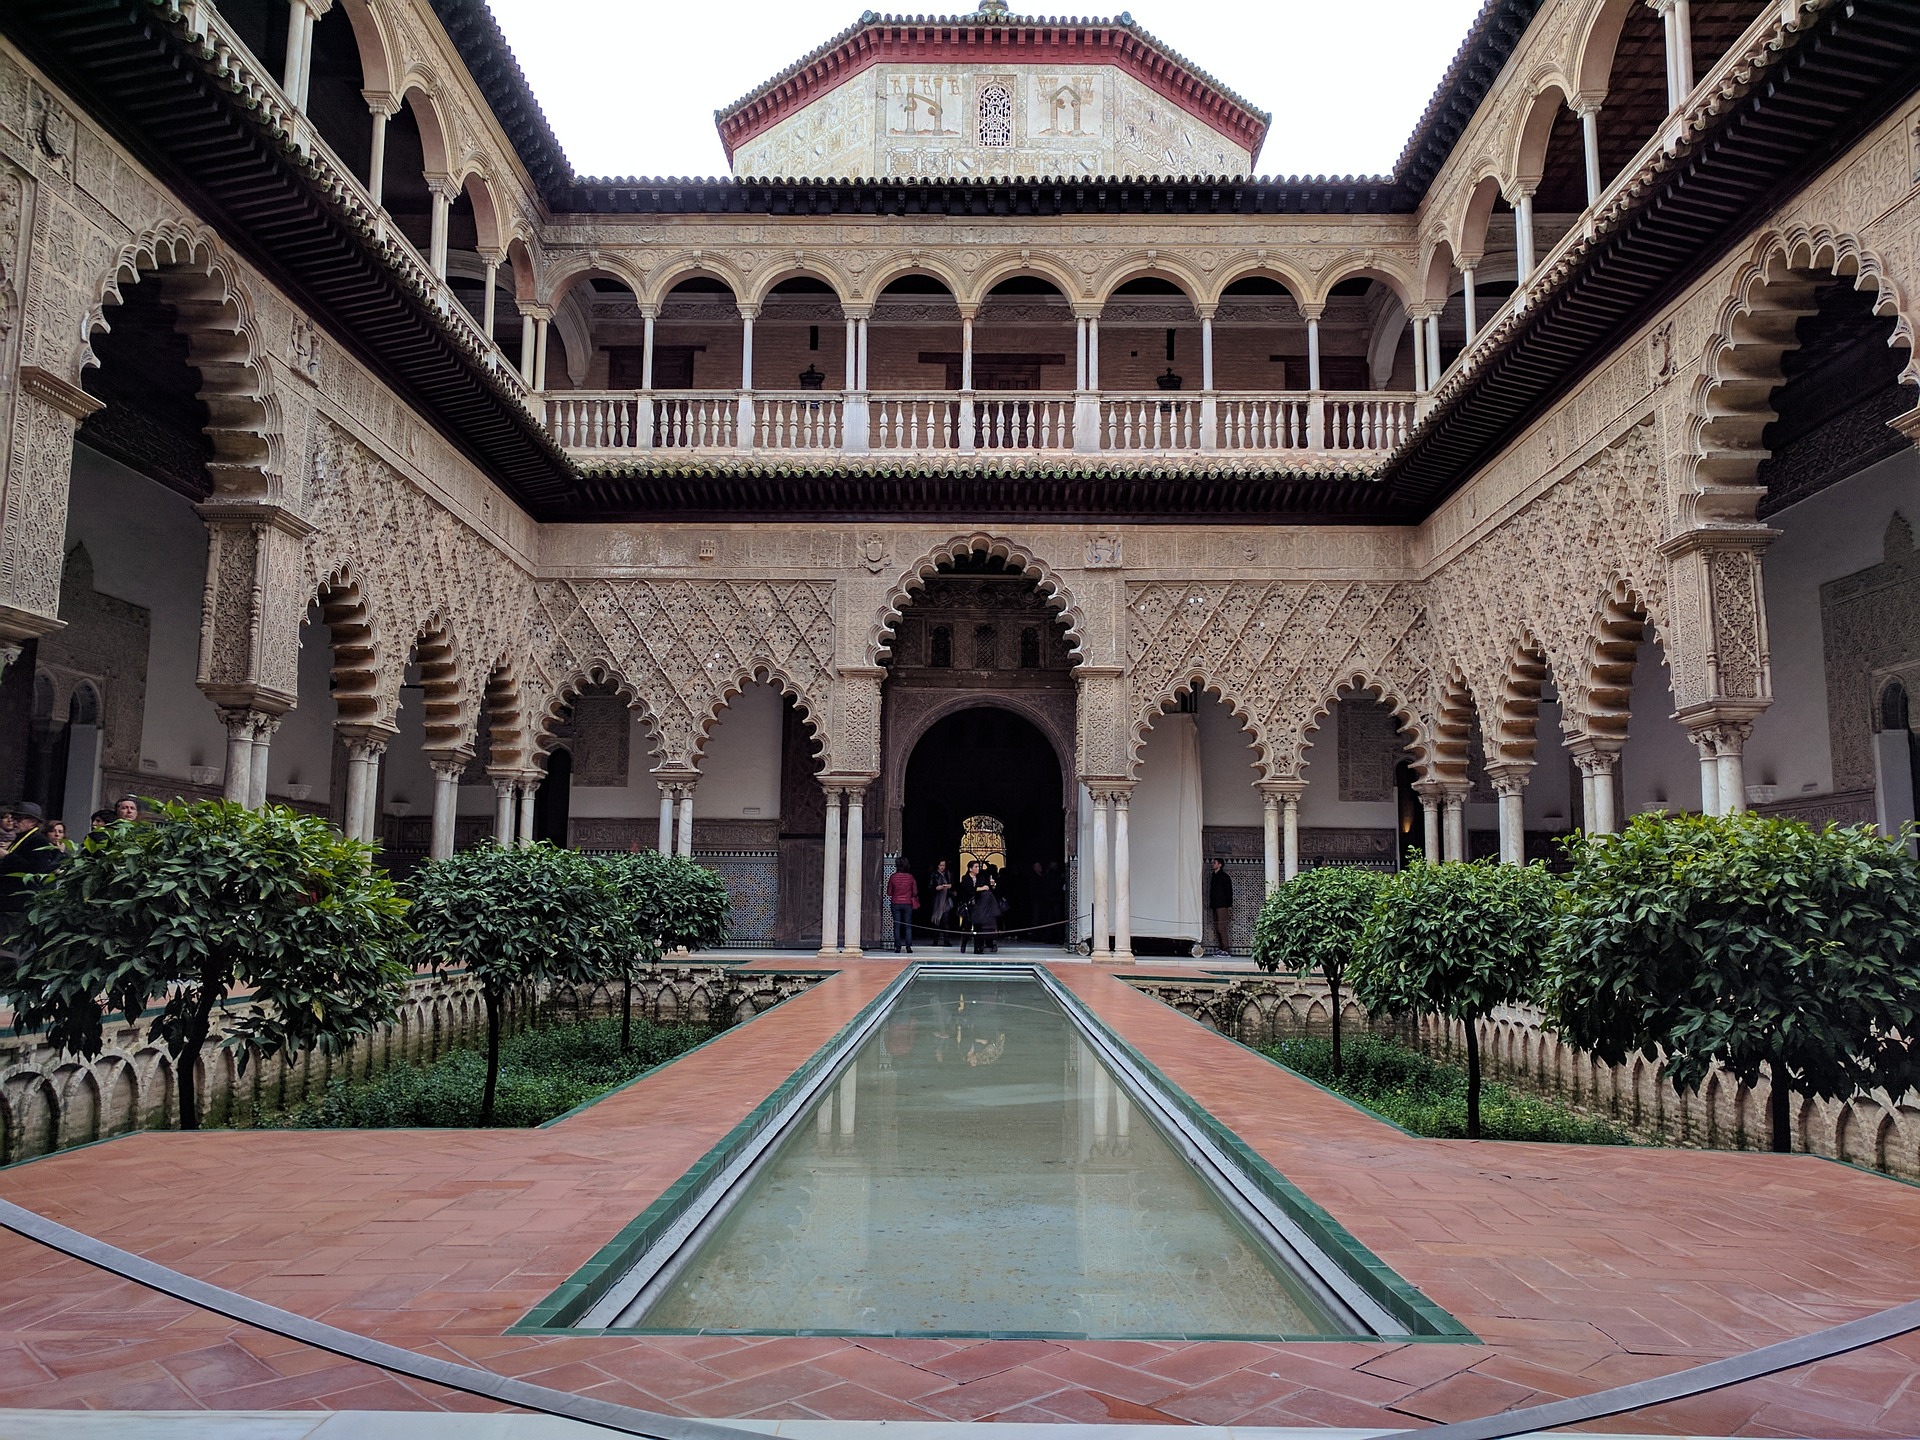 Royal Alcazar is one of the top Seville historical tours